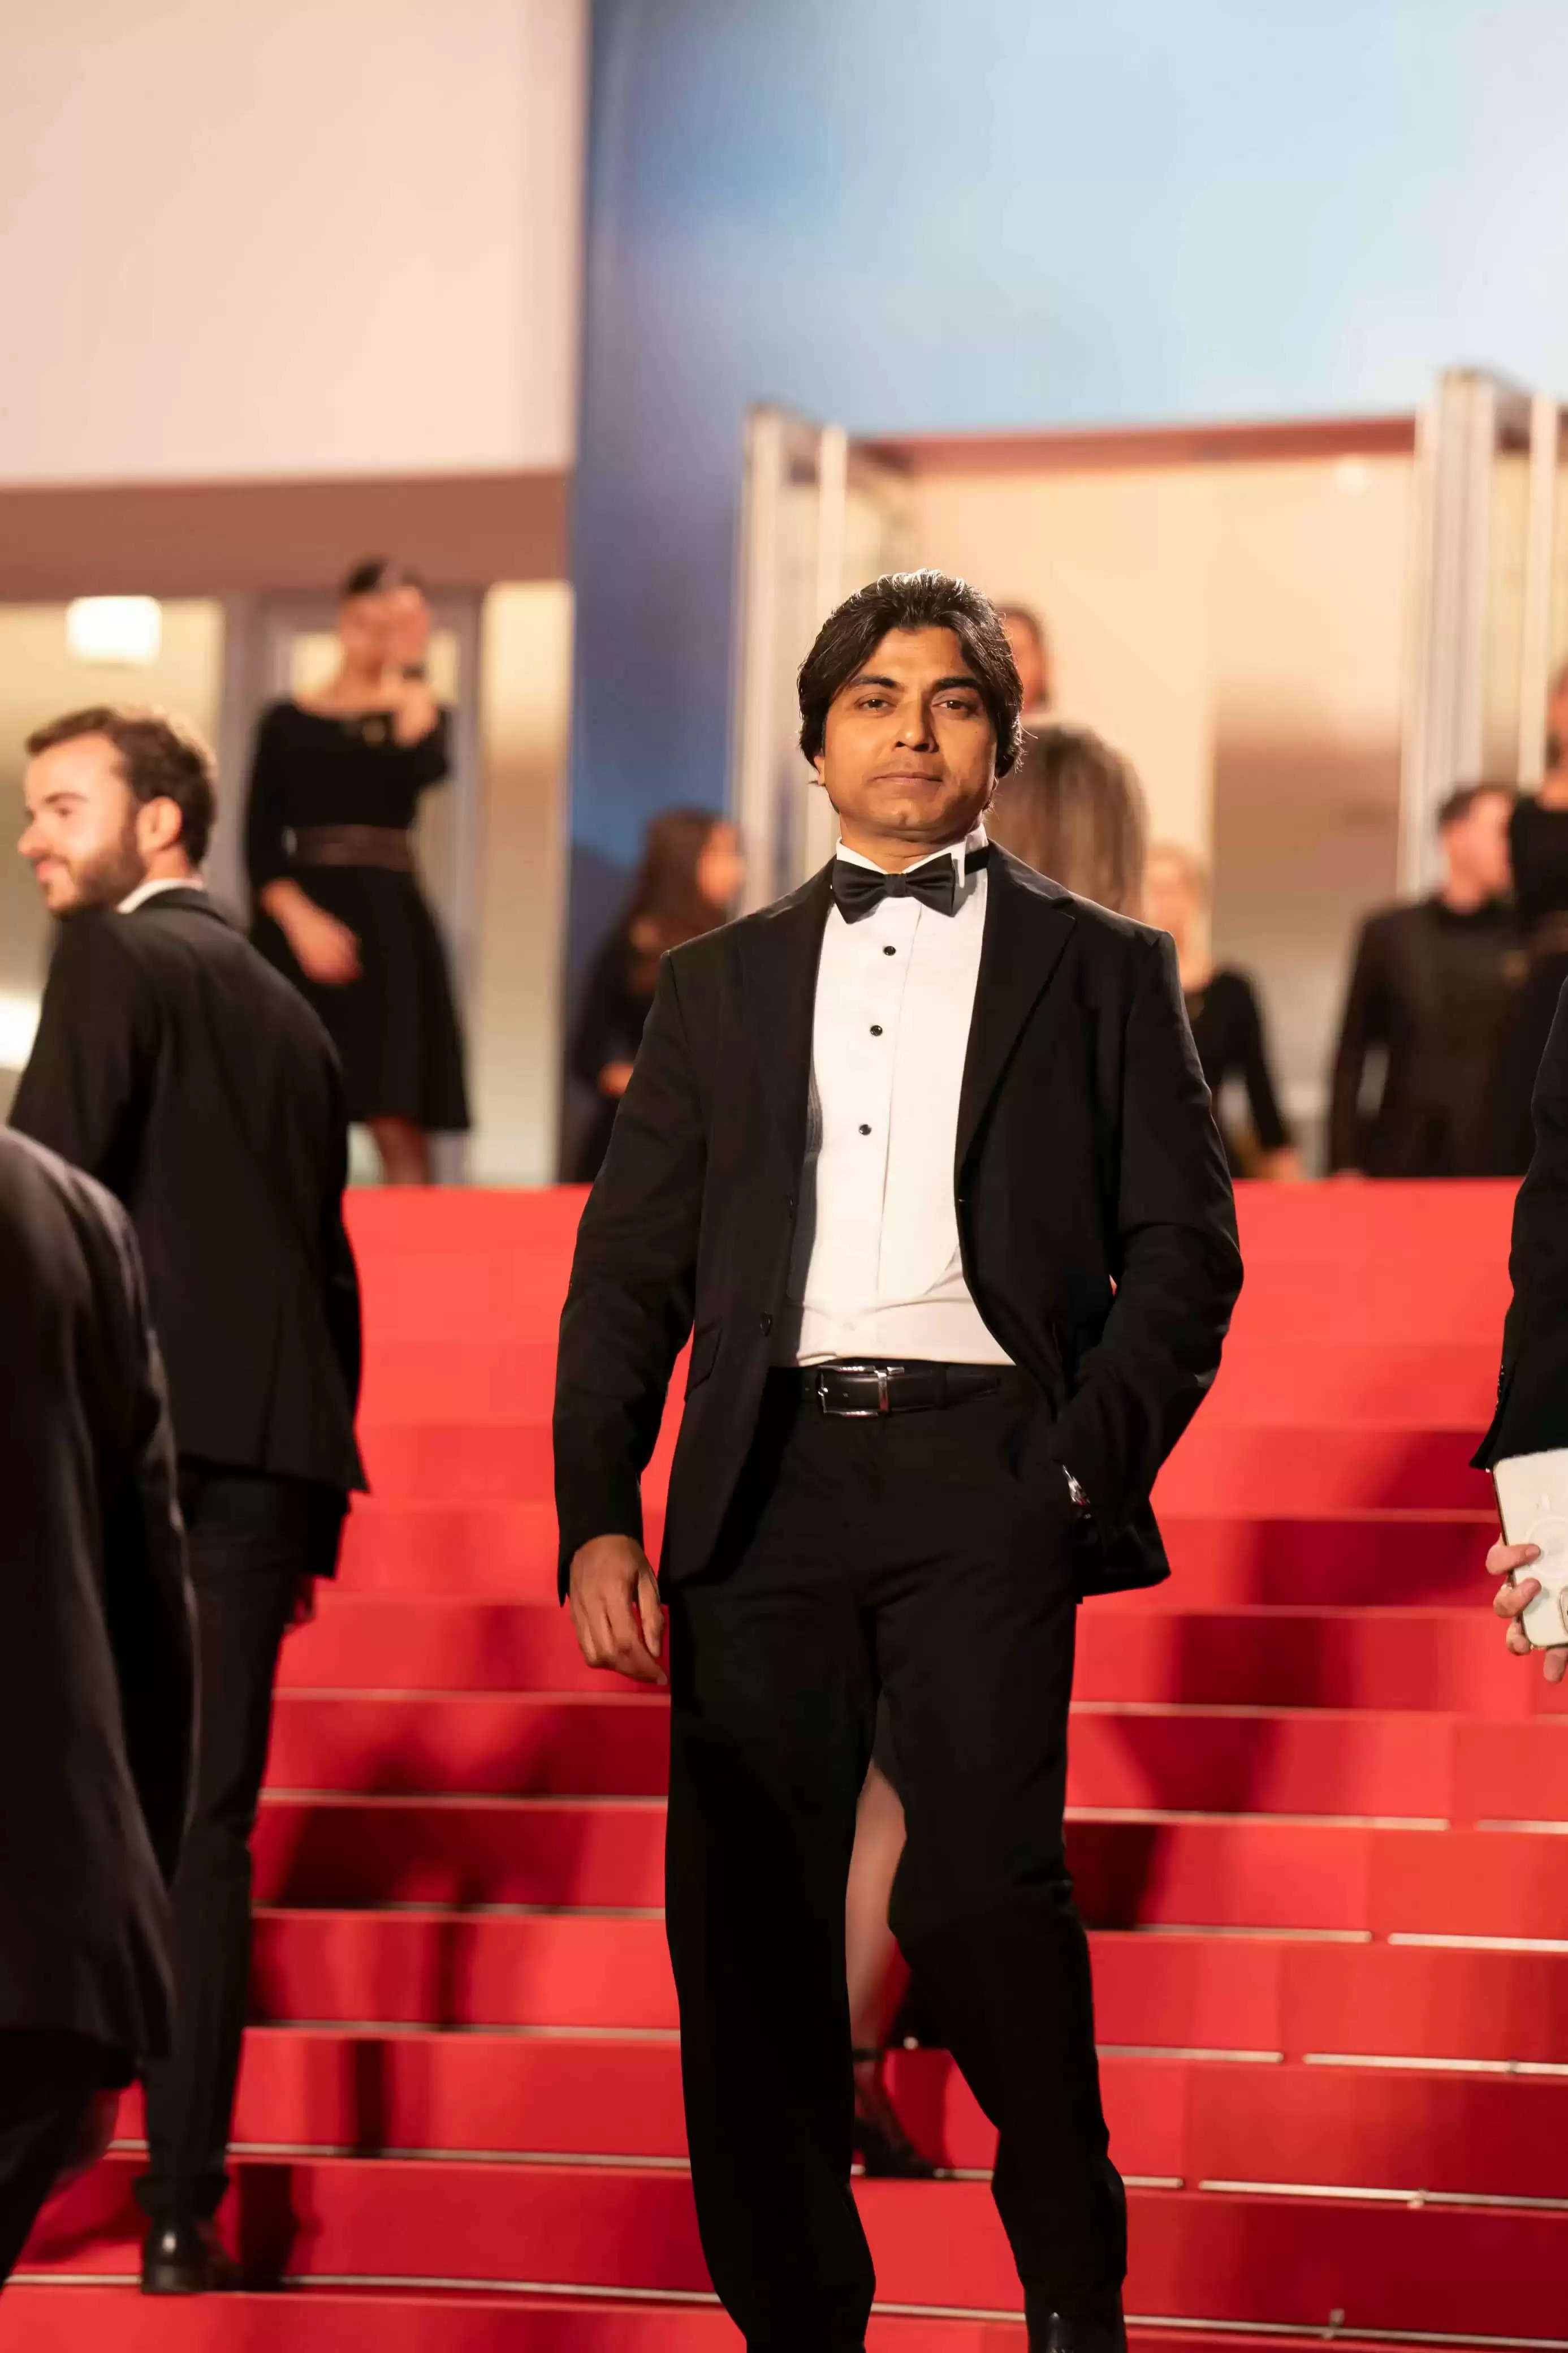 LIAQUAT GOLA, OWNER OF DIMENSION PICTURES PVT LTD, GRACES THE CANNES RED CARPET FOR THE GLORIOUS UNVEILING OF HIS FILM “BEING ALIVE”